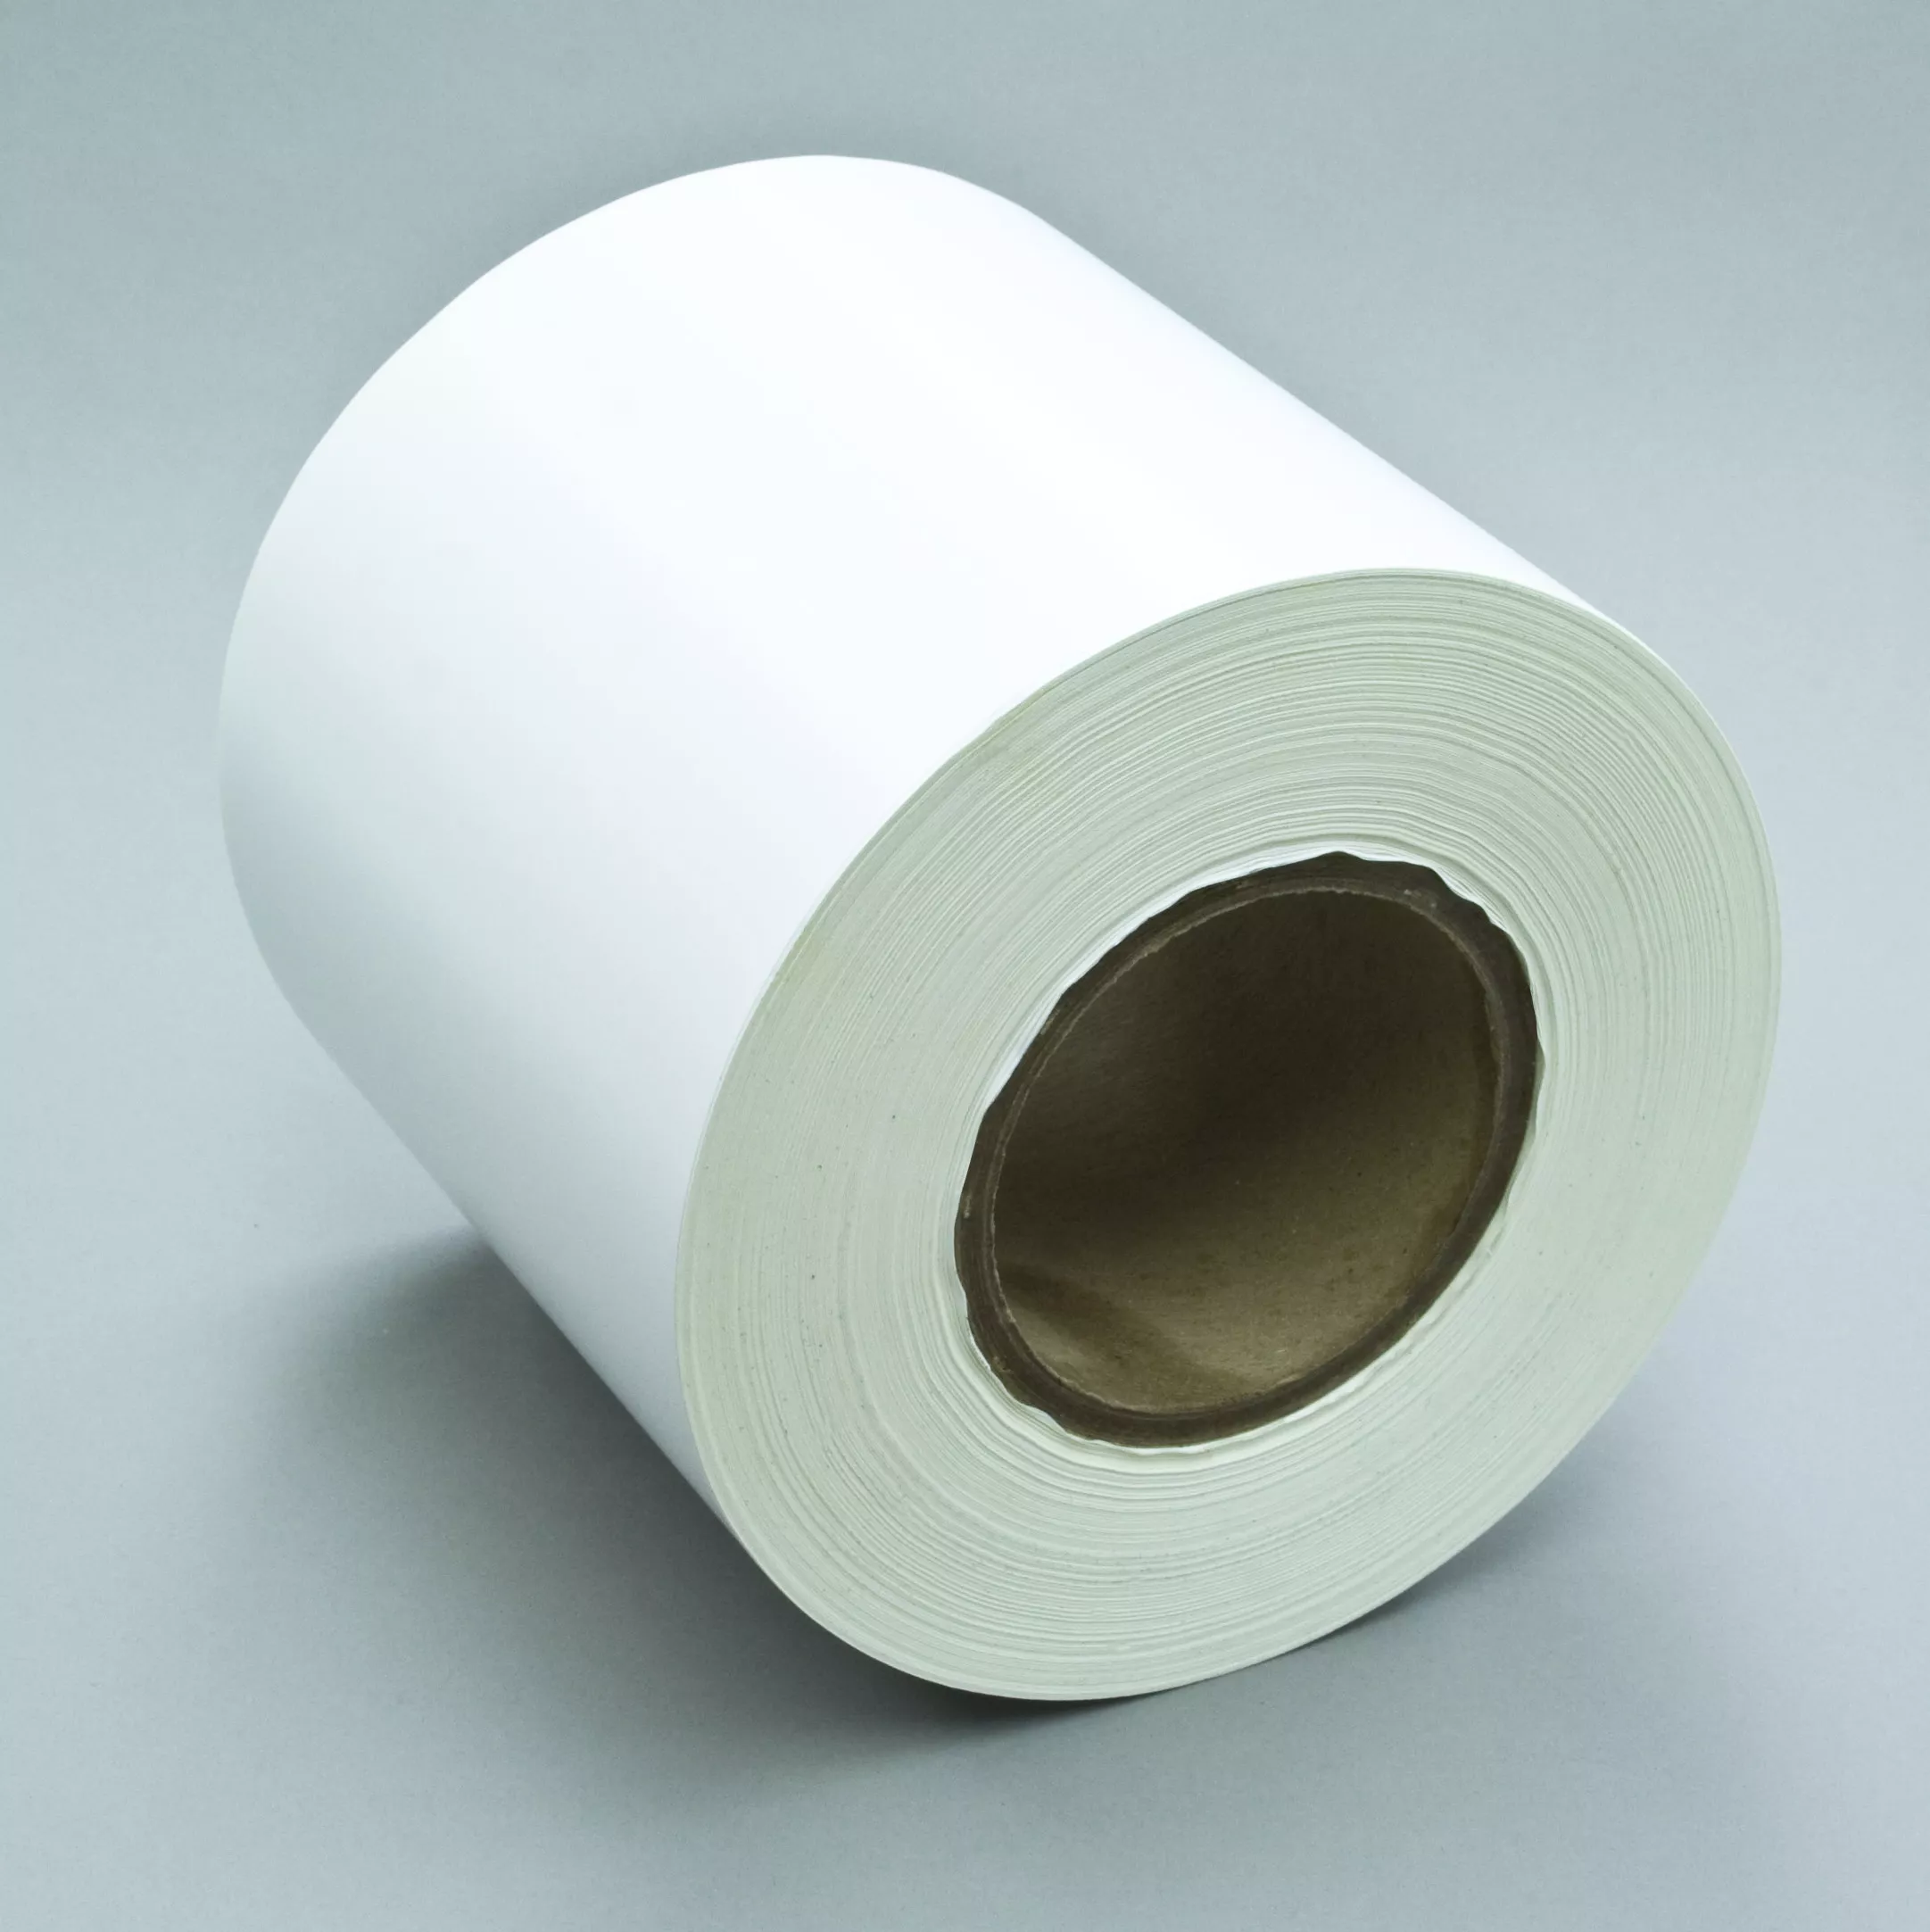 3M™ Removable Label Material 7600, White Vinyl Gloss, 6 in x 1668 ft, 1
Roll/Case